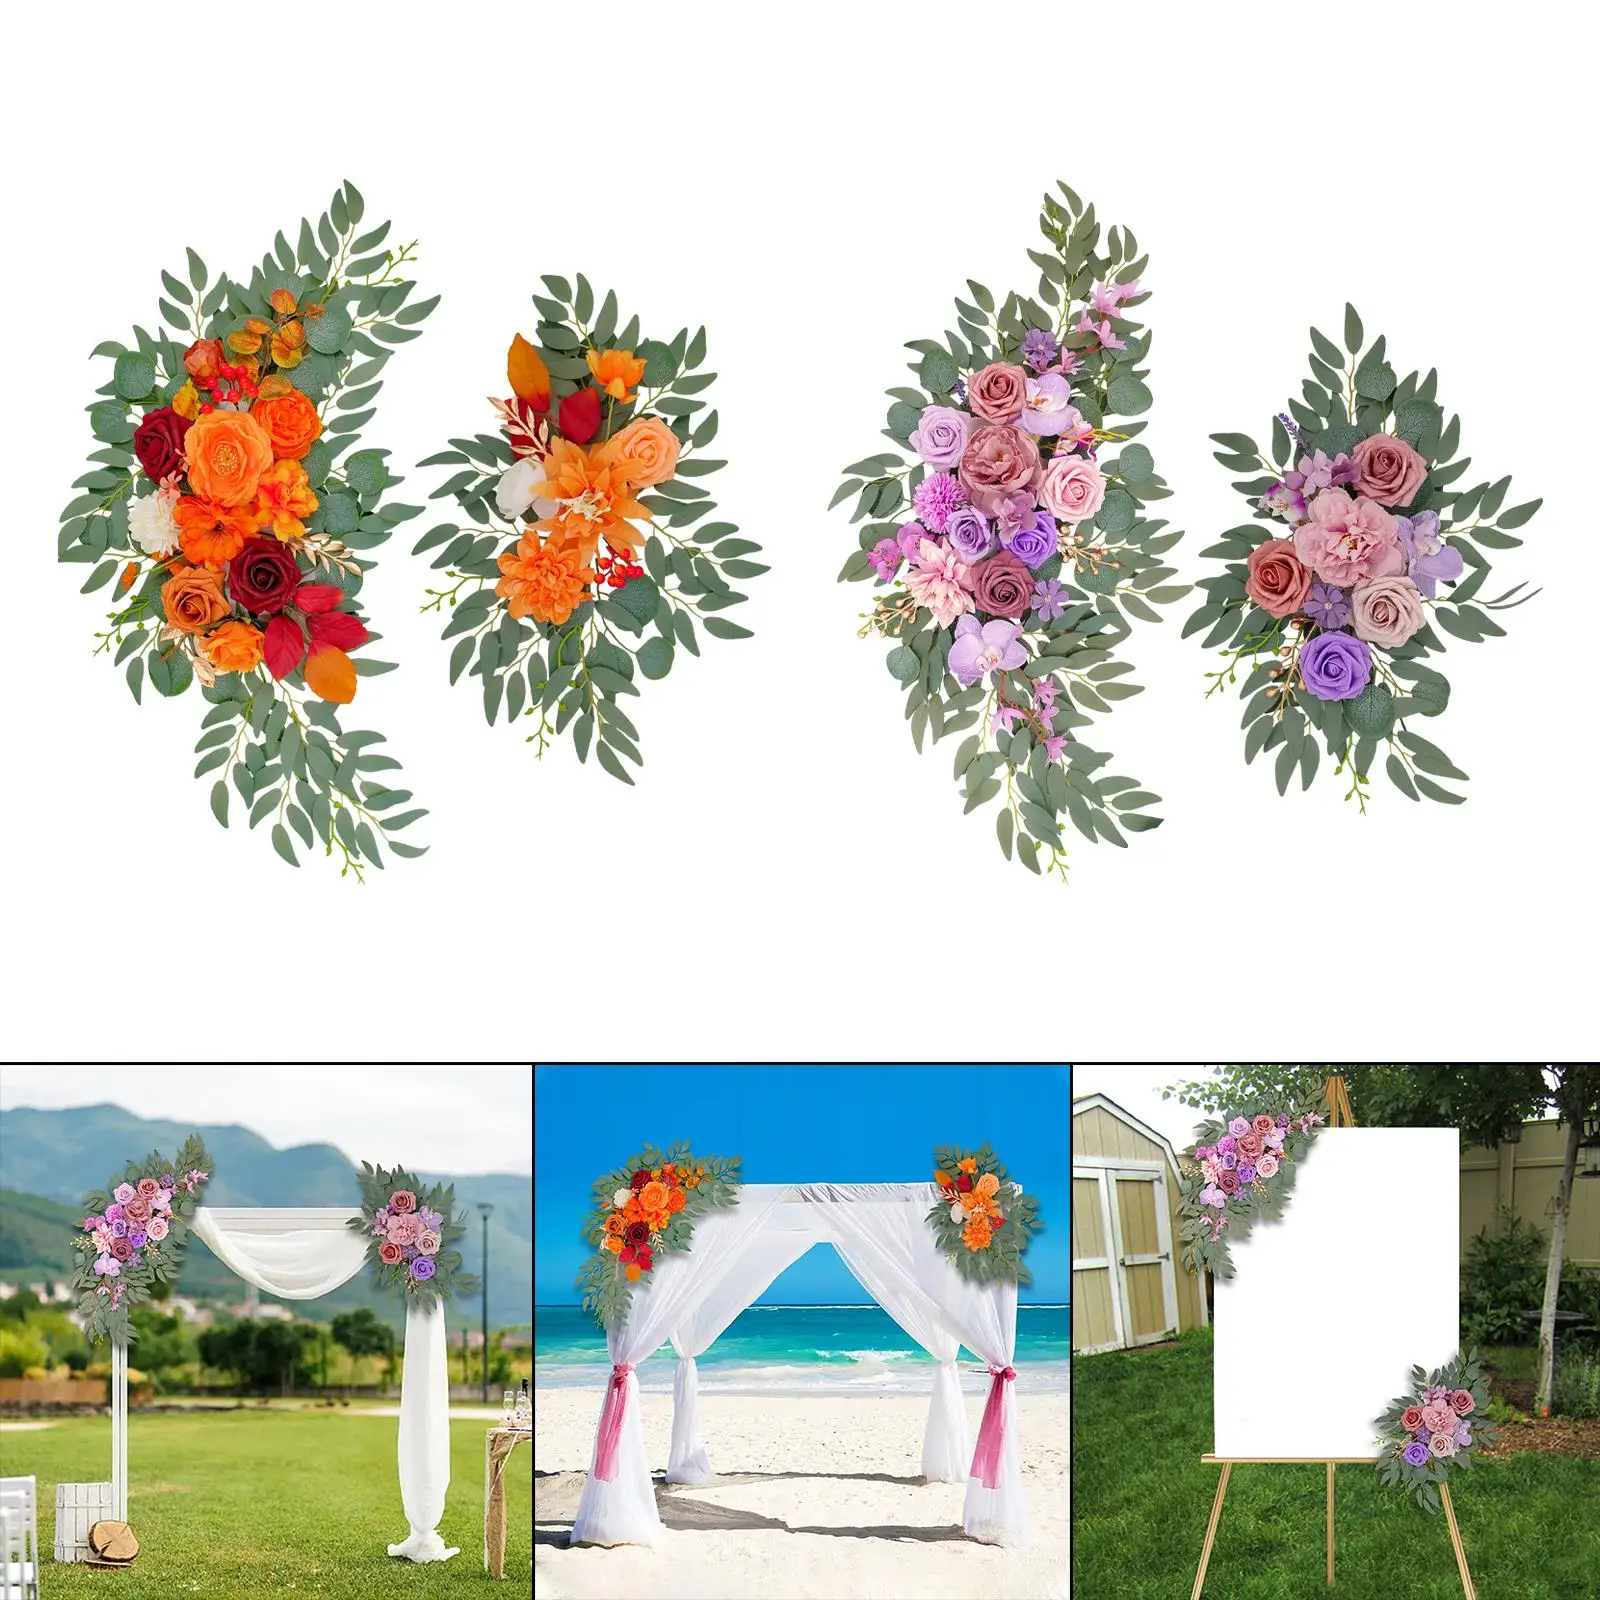 2x Wedding Arch Flowers Artificial Floral Swag Centerpiece Rustic Floral Arrangement Swag for Wall Arbor Table Window Holiday